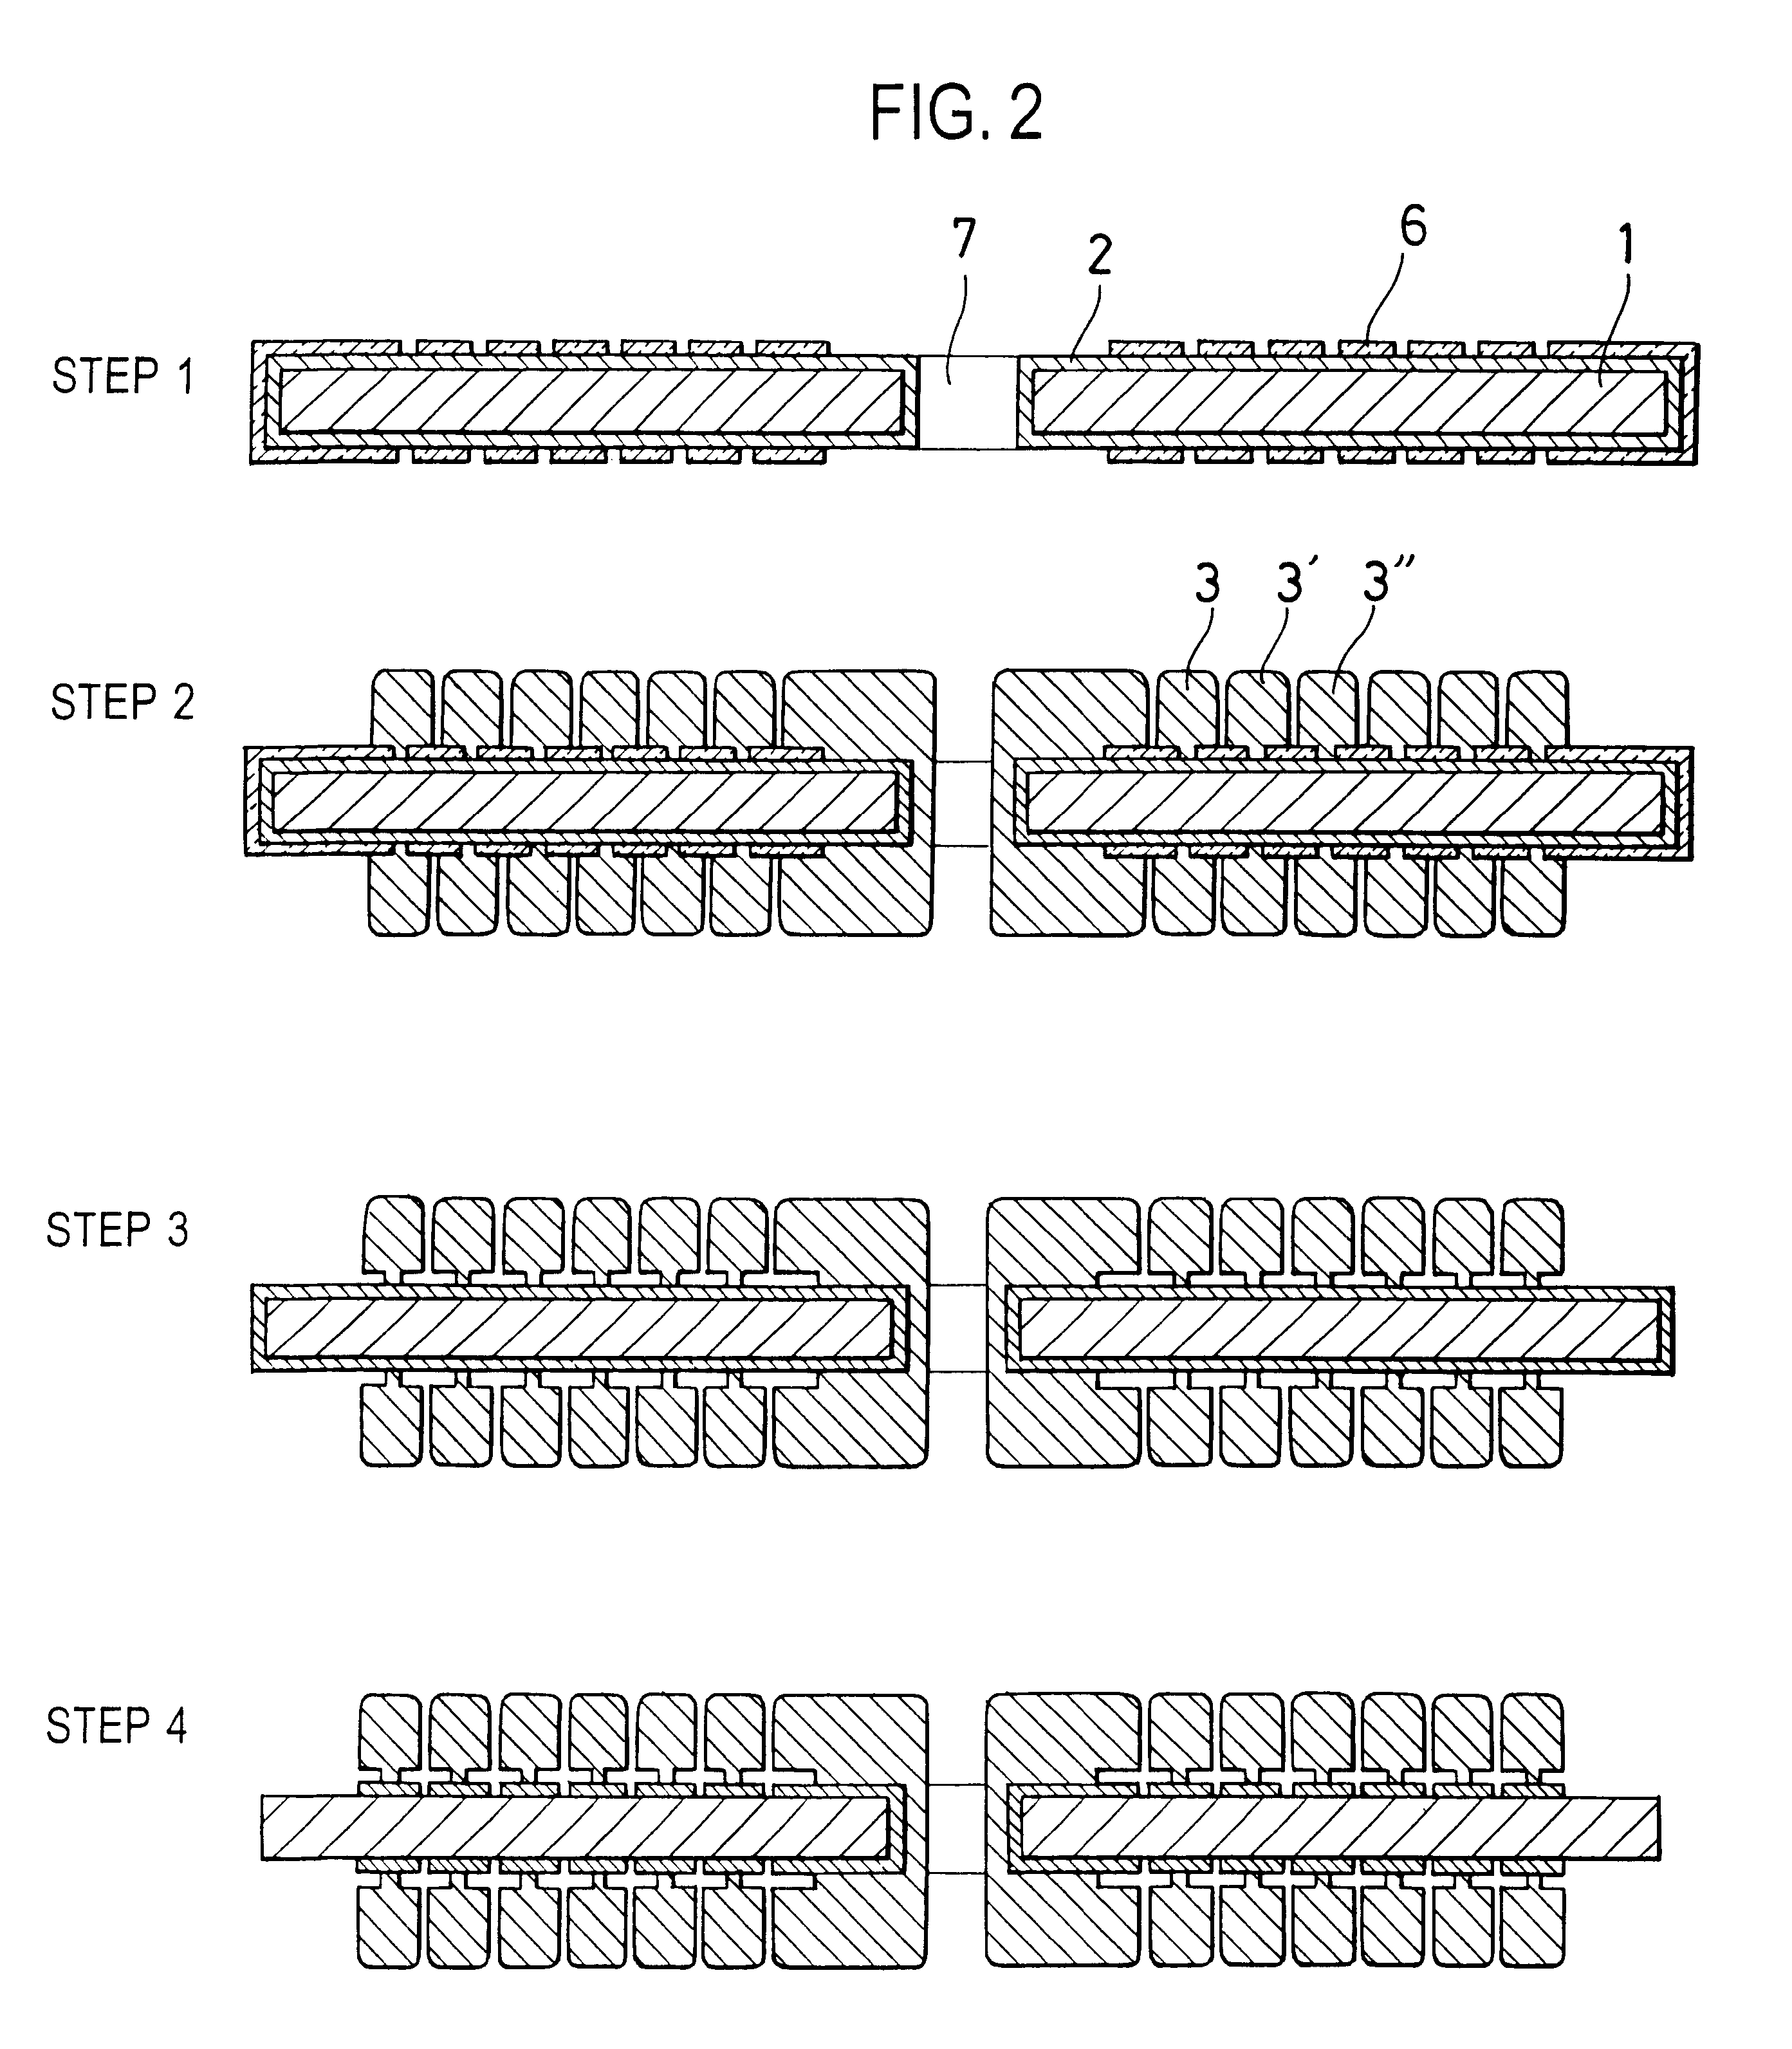 Planar coil and planar transformer, and process of fabricating a high-aspect conductive device